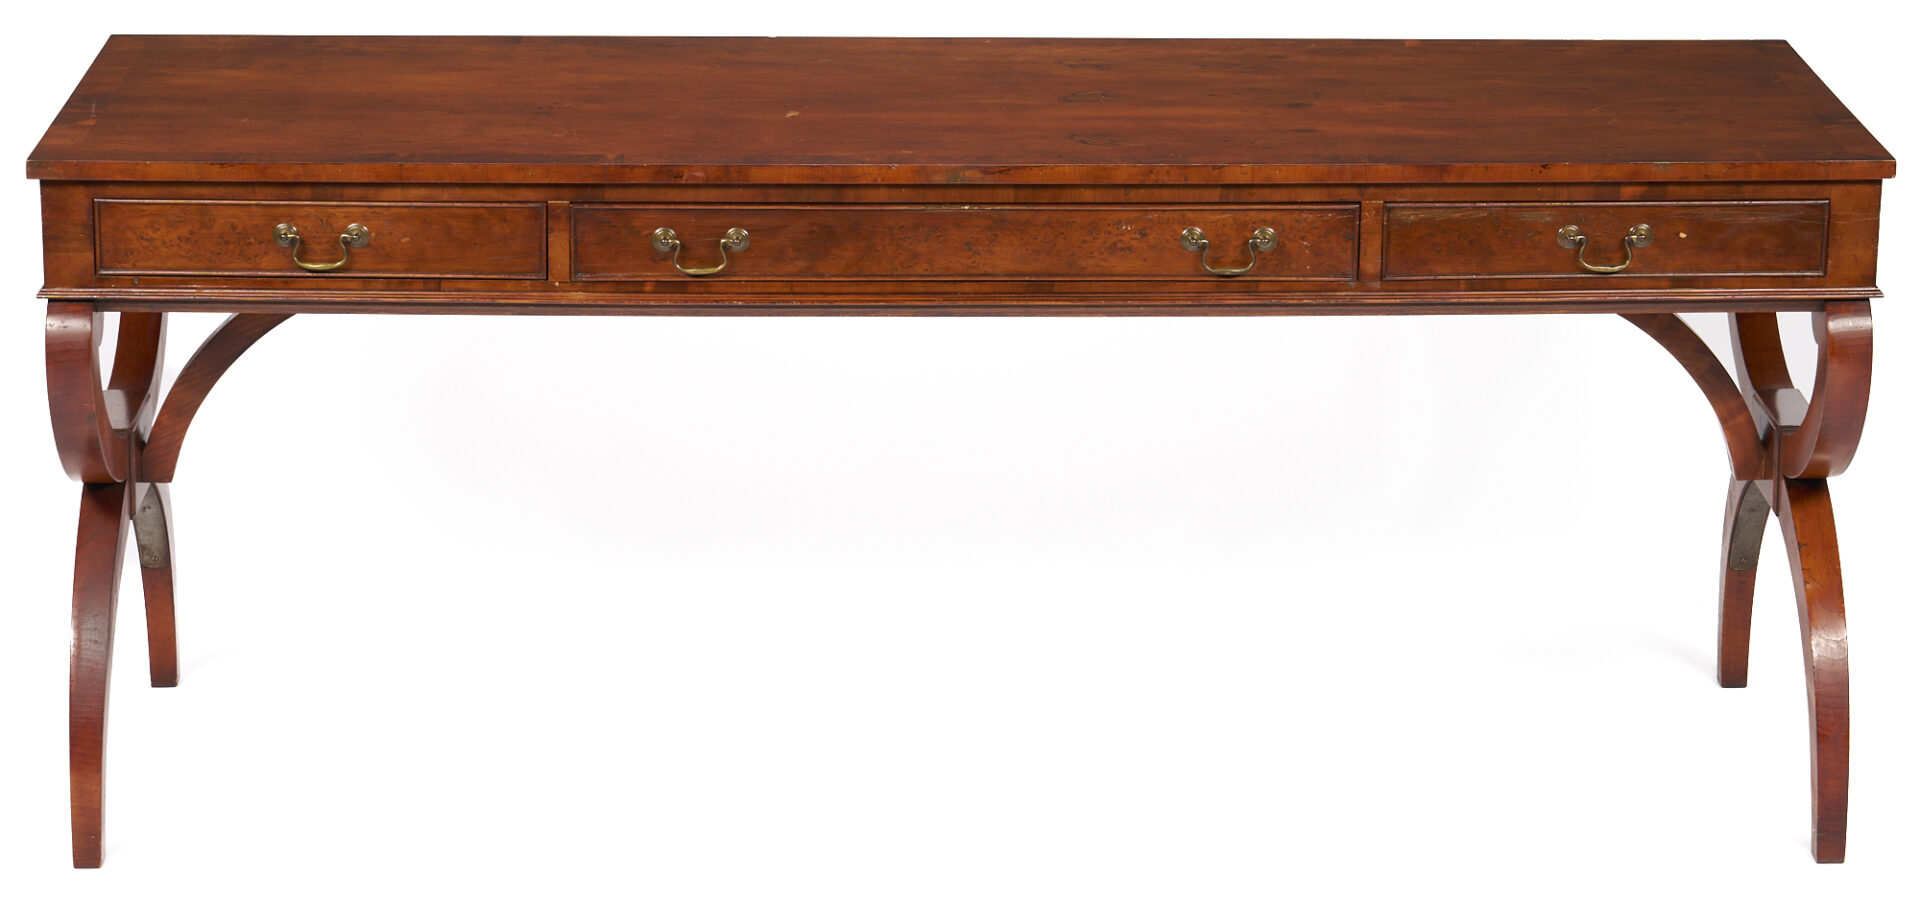 Lot 203: English Regency Style Inlaid Writing Table